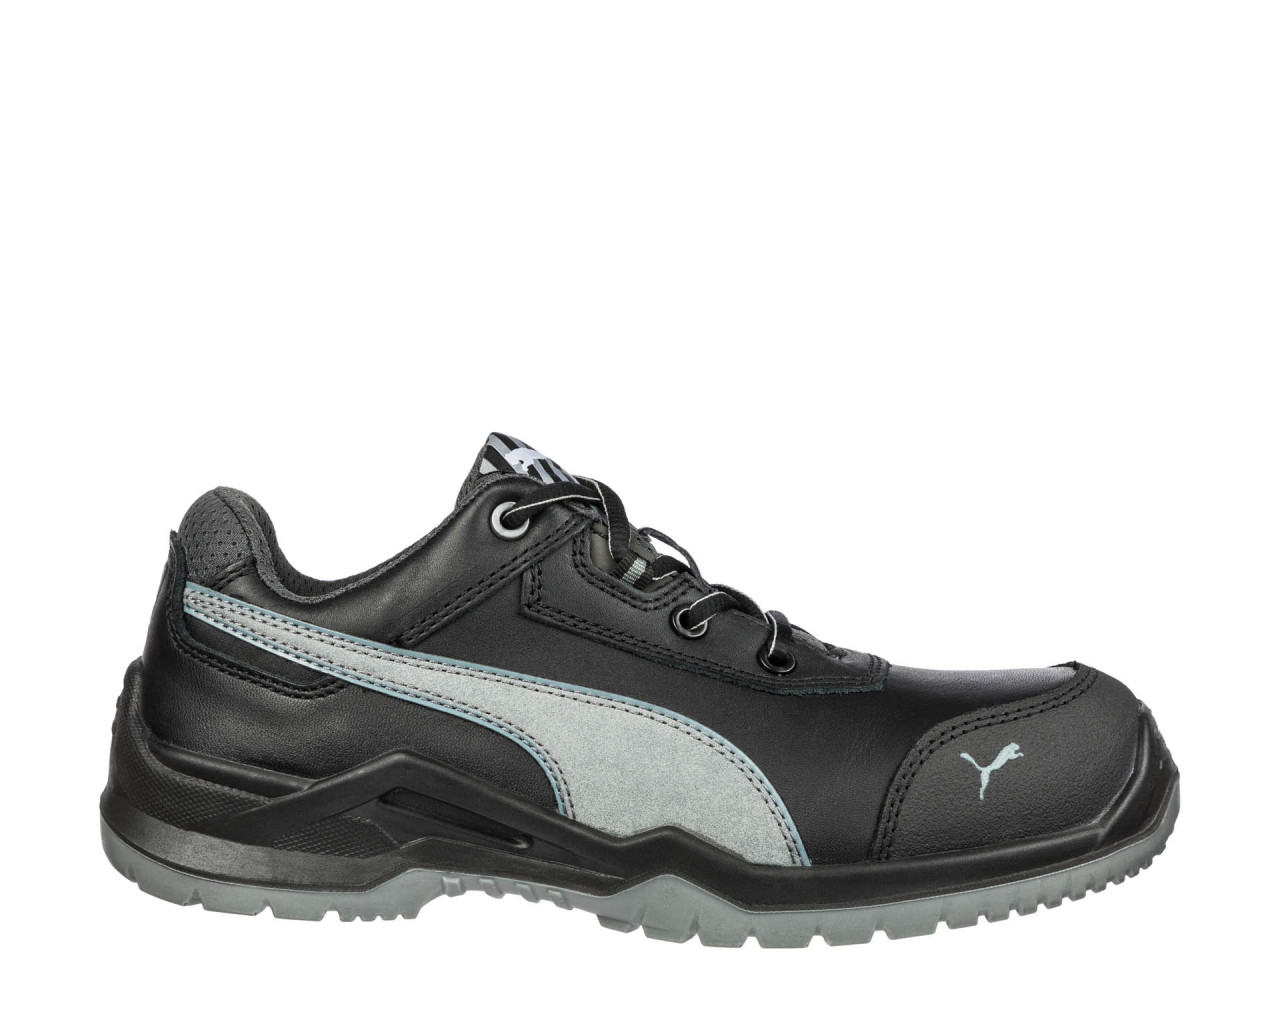 PUMA SAFETY safety shoes S3 ESD SRC ARGON RX LOW | Puma Safety English